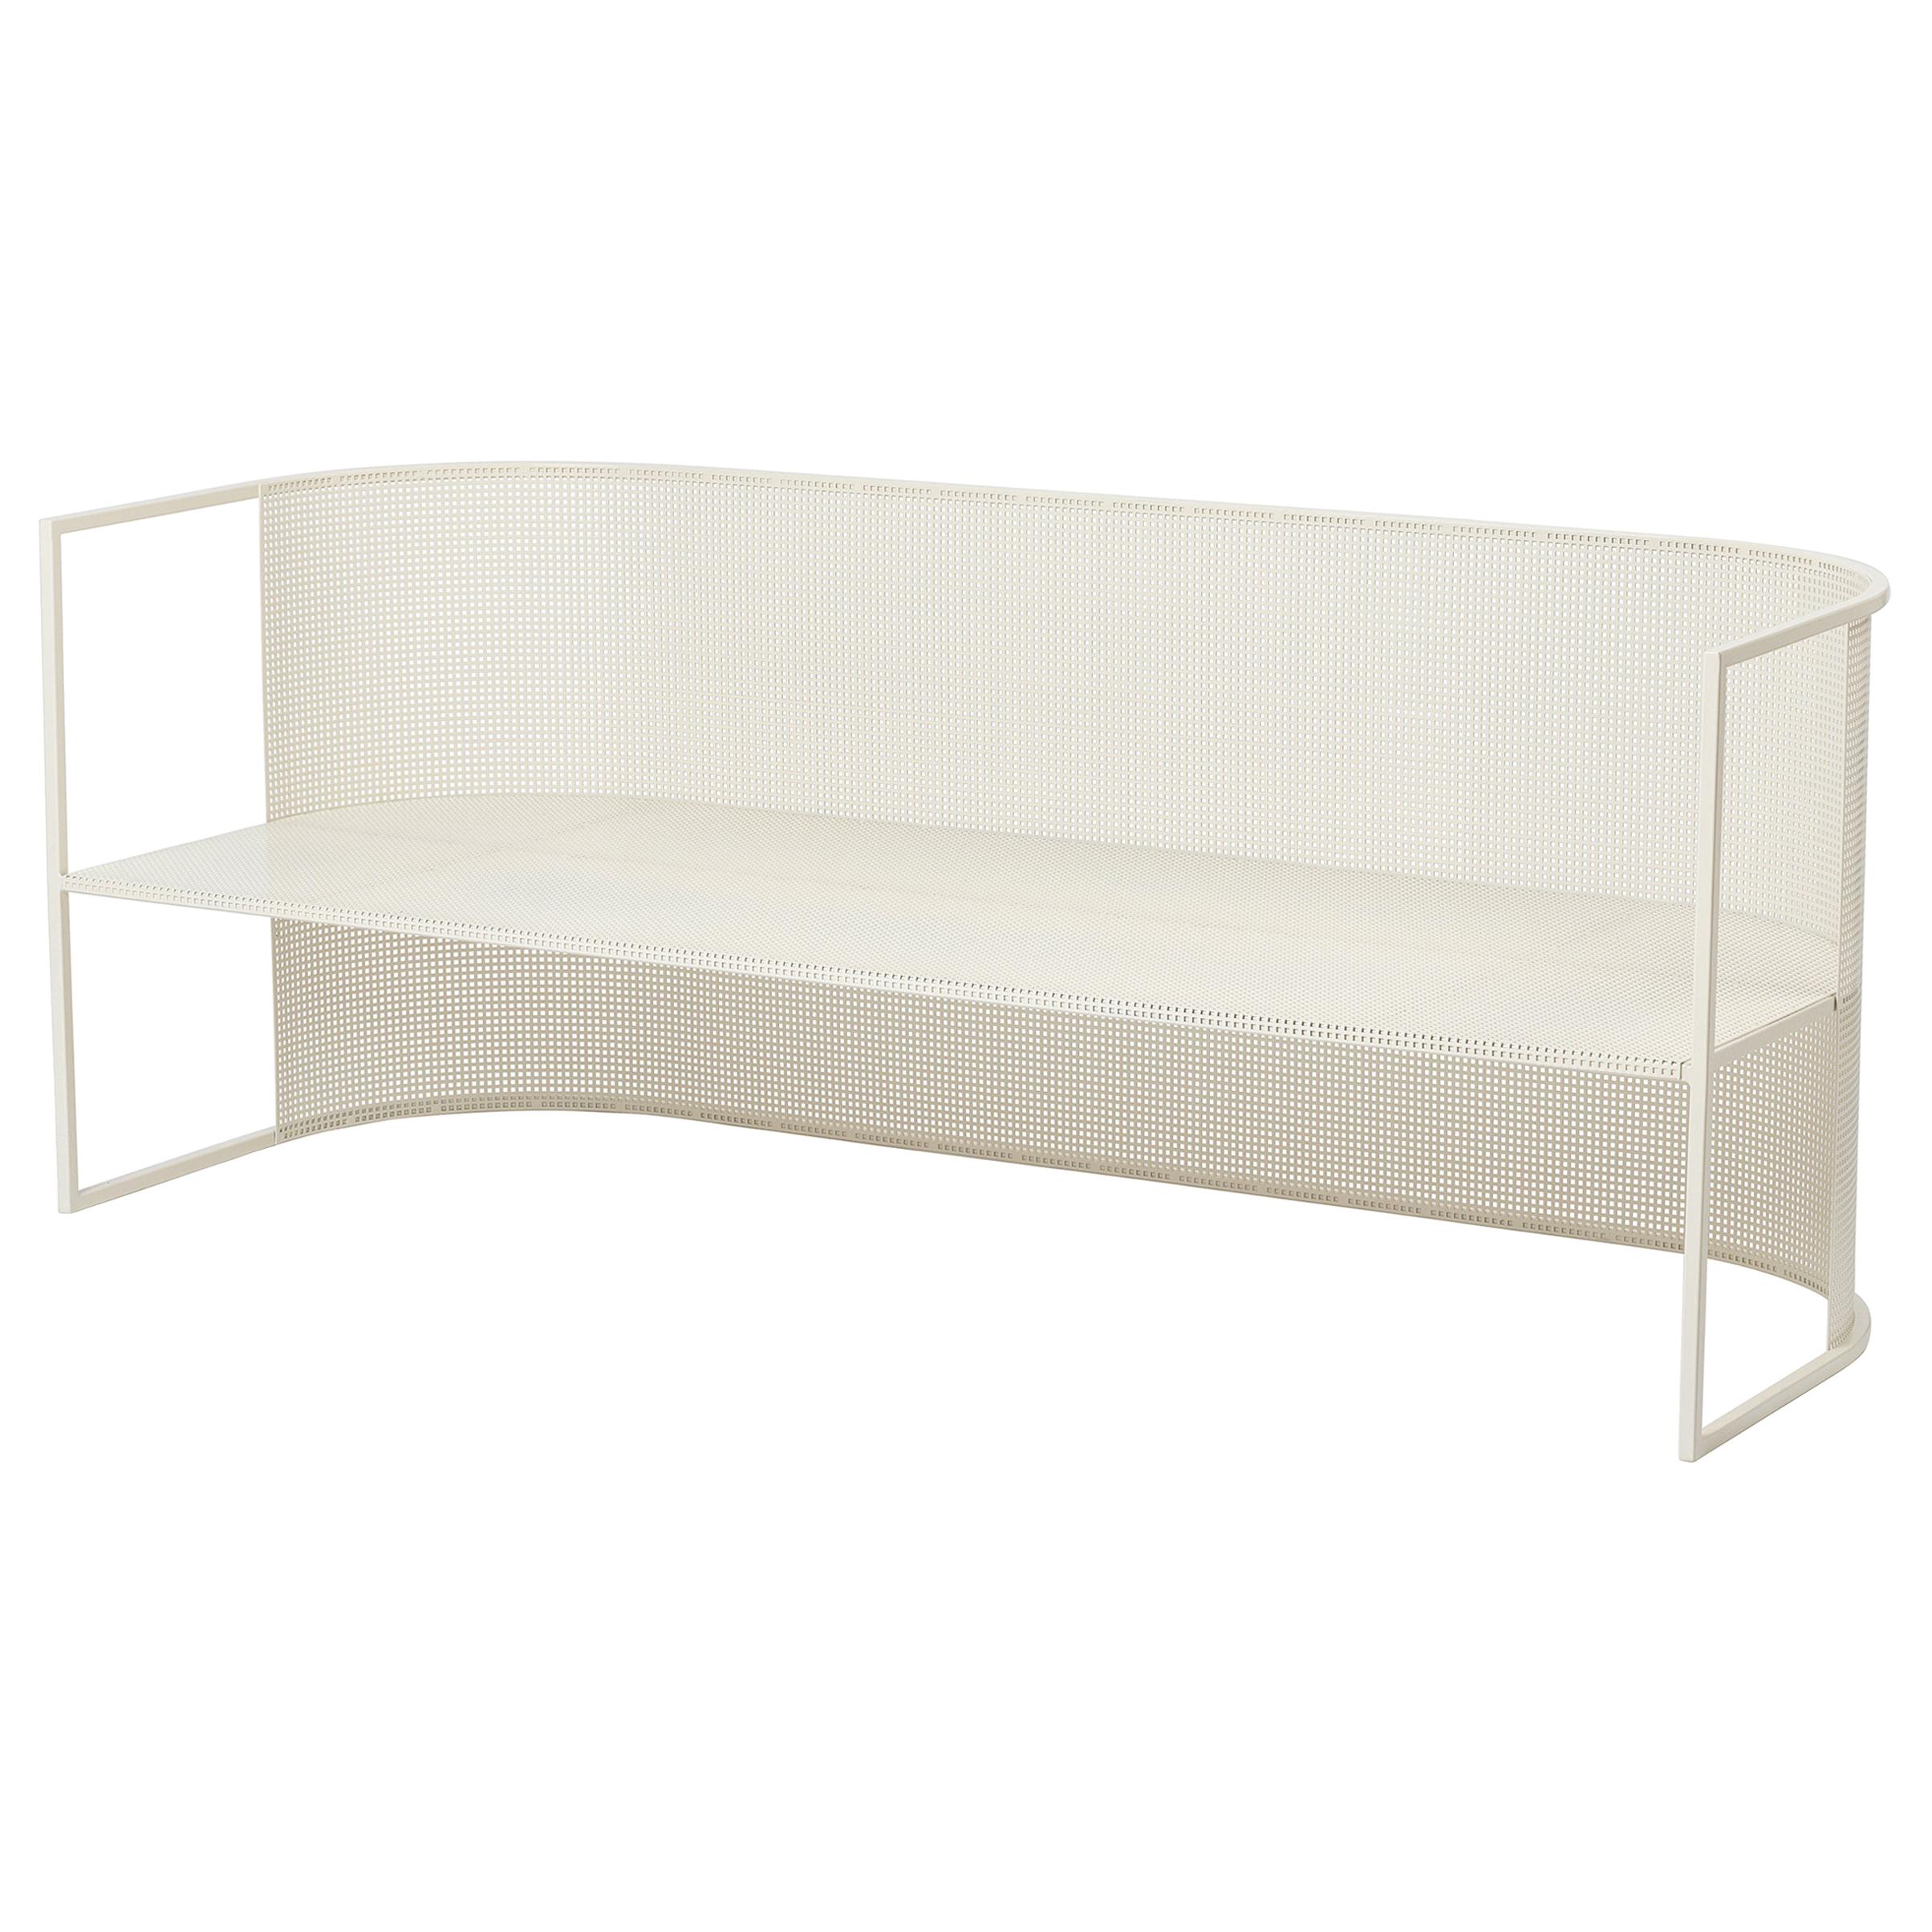 Steel Bahaus Lounge Bench by Kristina Dam Studio For Sale